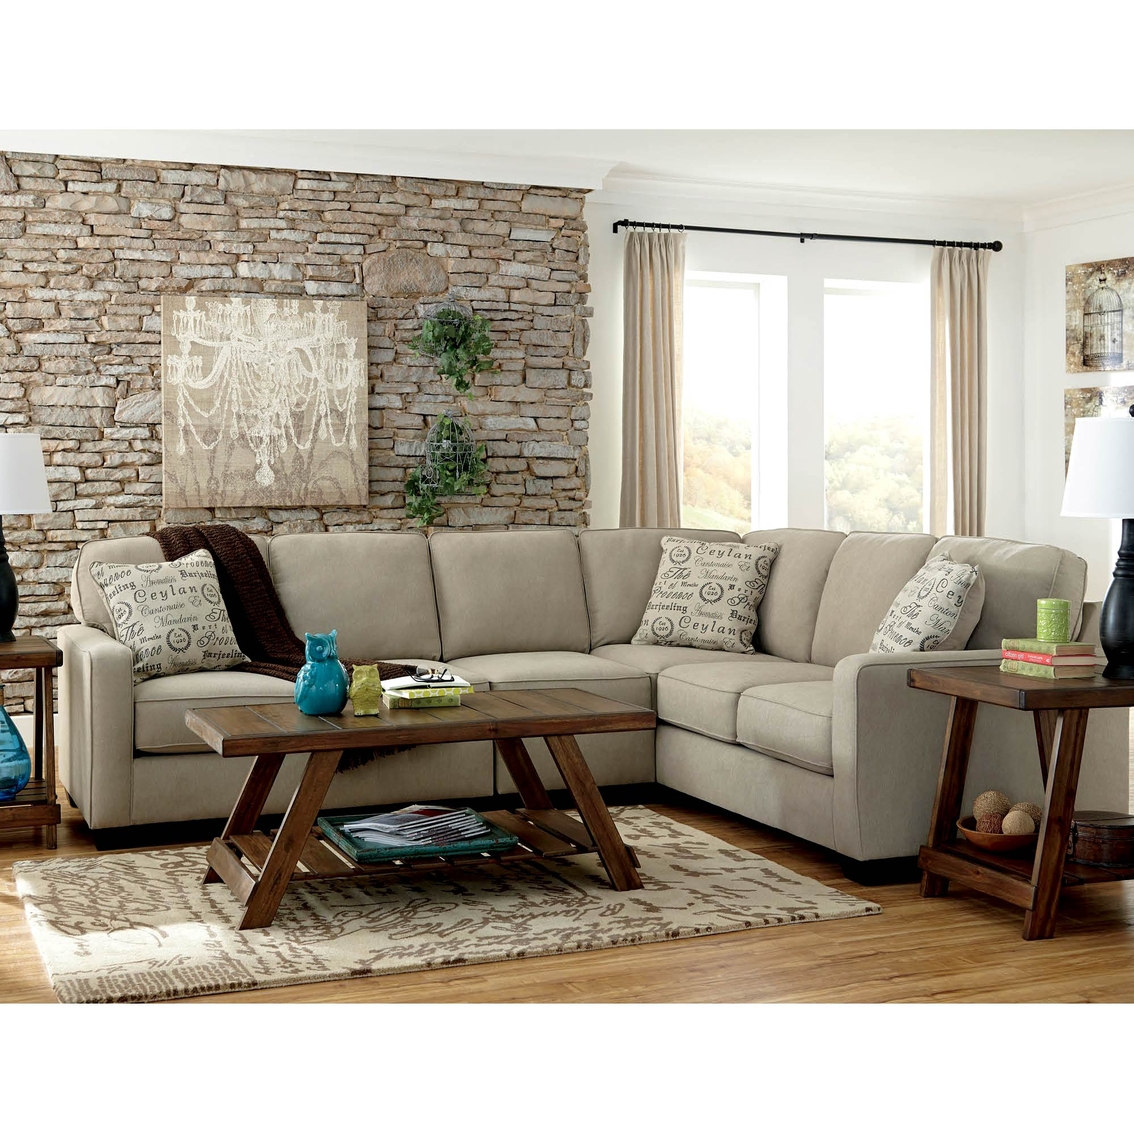 Signature Design by Ashley Alenya 3 pc. Sectional - Image 2 of 2